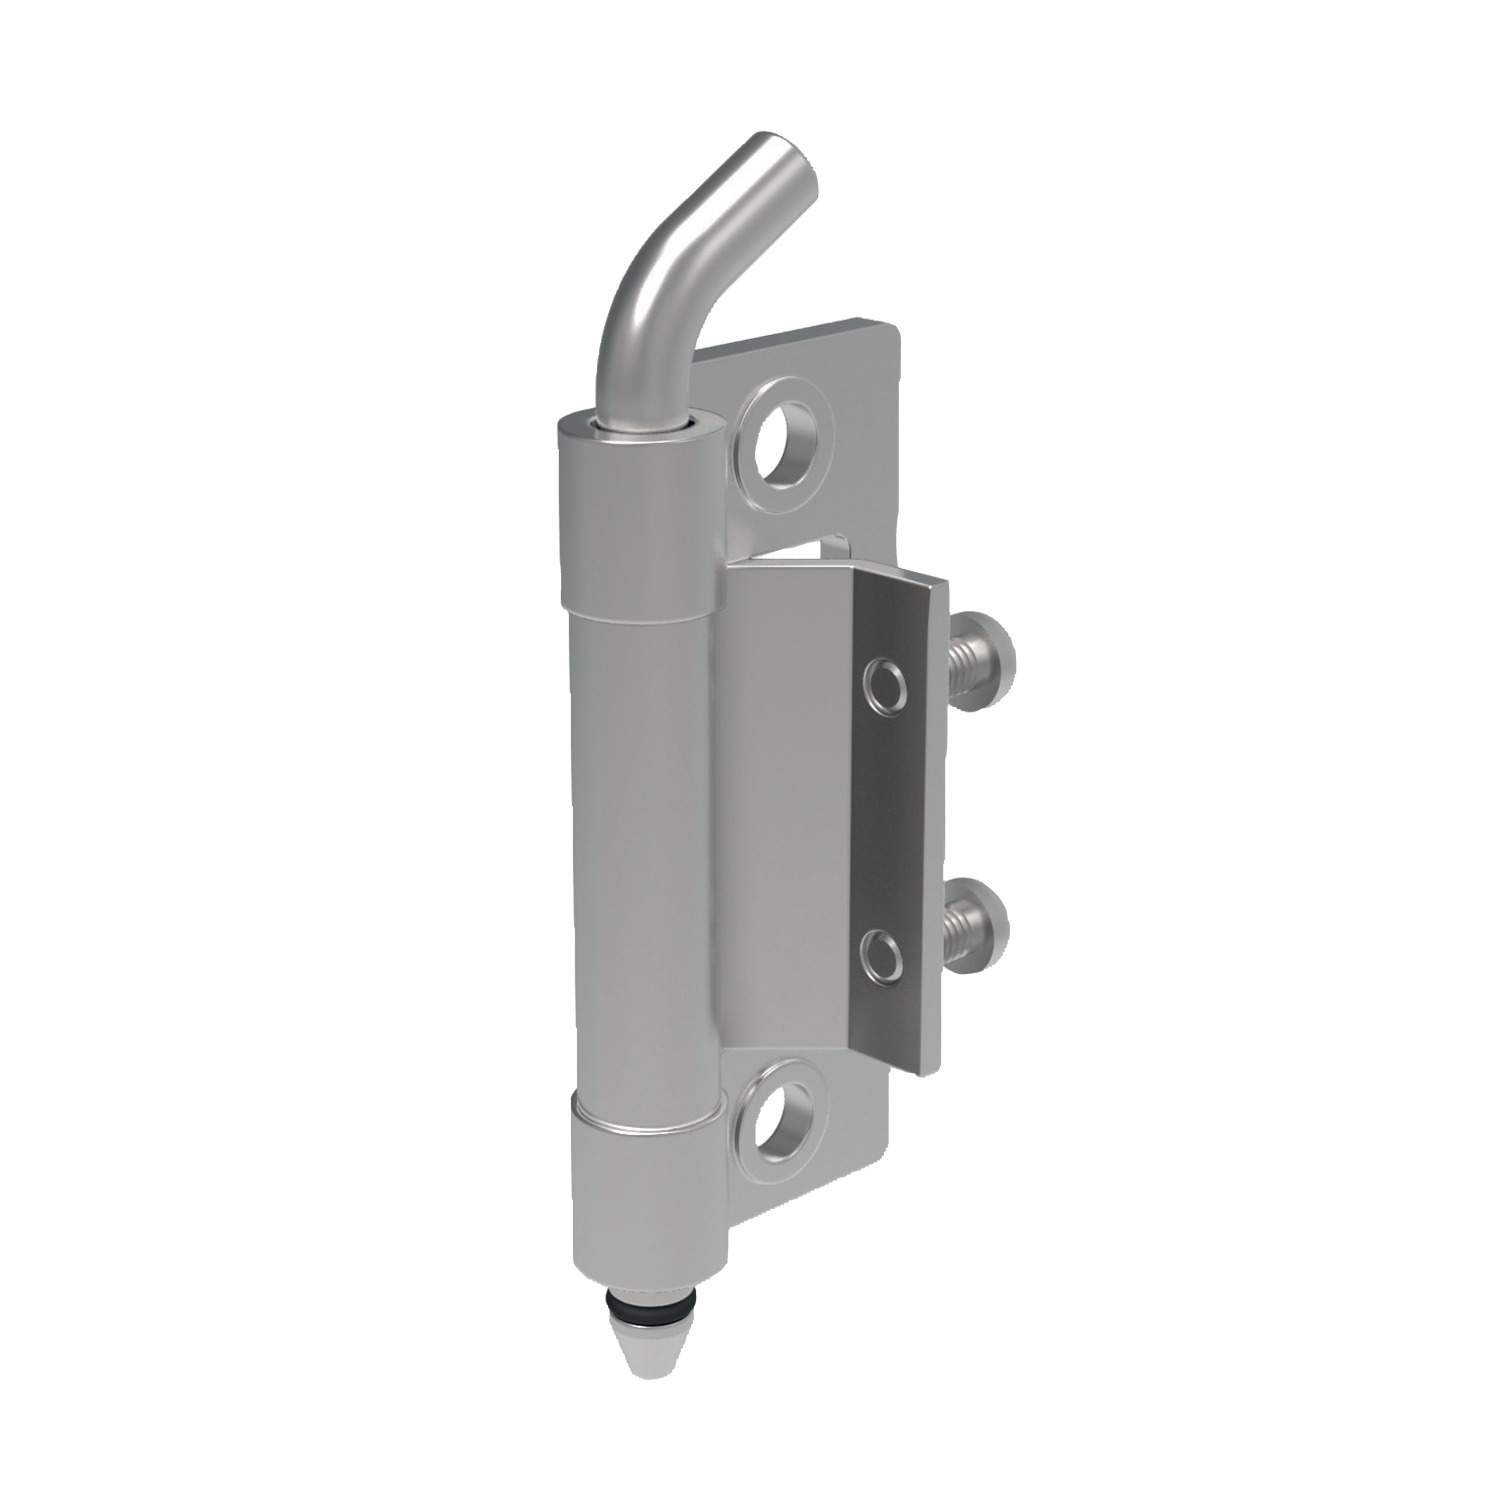 S2104.AW0120 Concealed Pivot Hinges - Lift Off 20mm door return - bolt or weld - Stainless 304. Supplied in multiples of 4